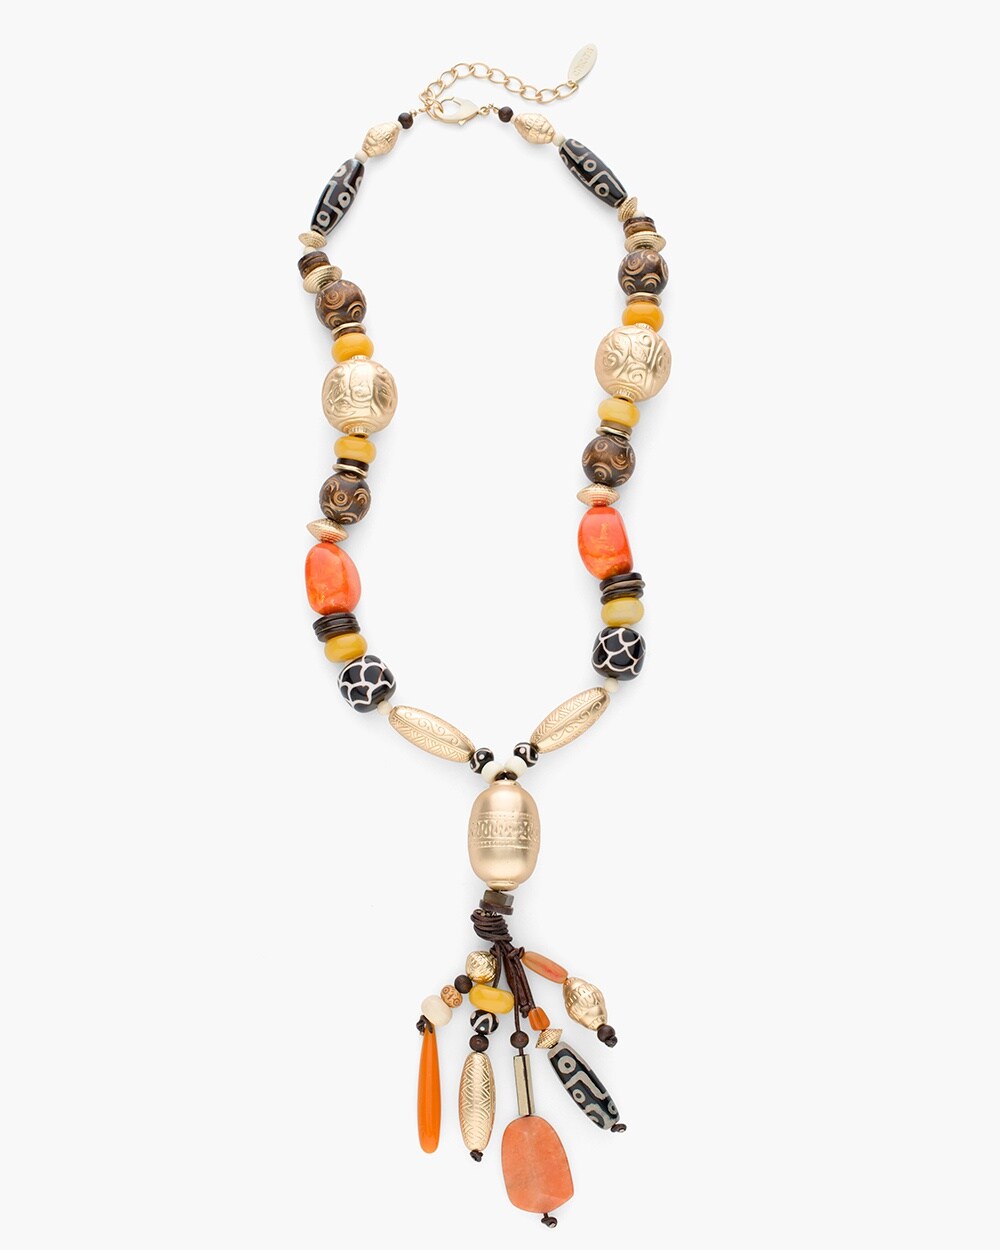 The Collectibles Bahati Necklace